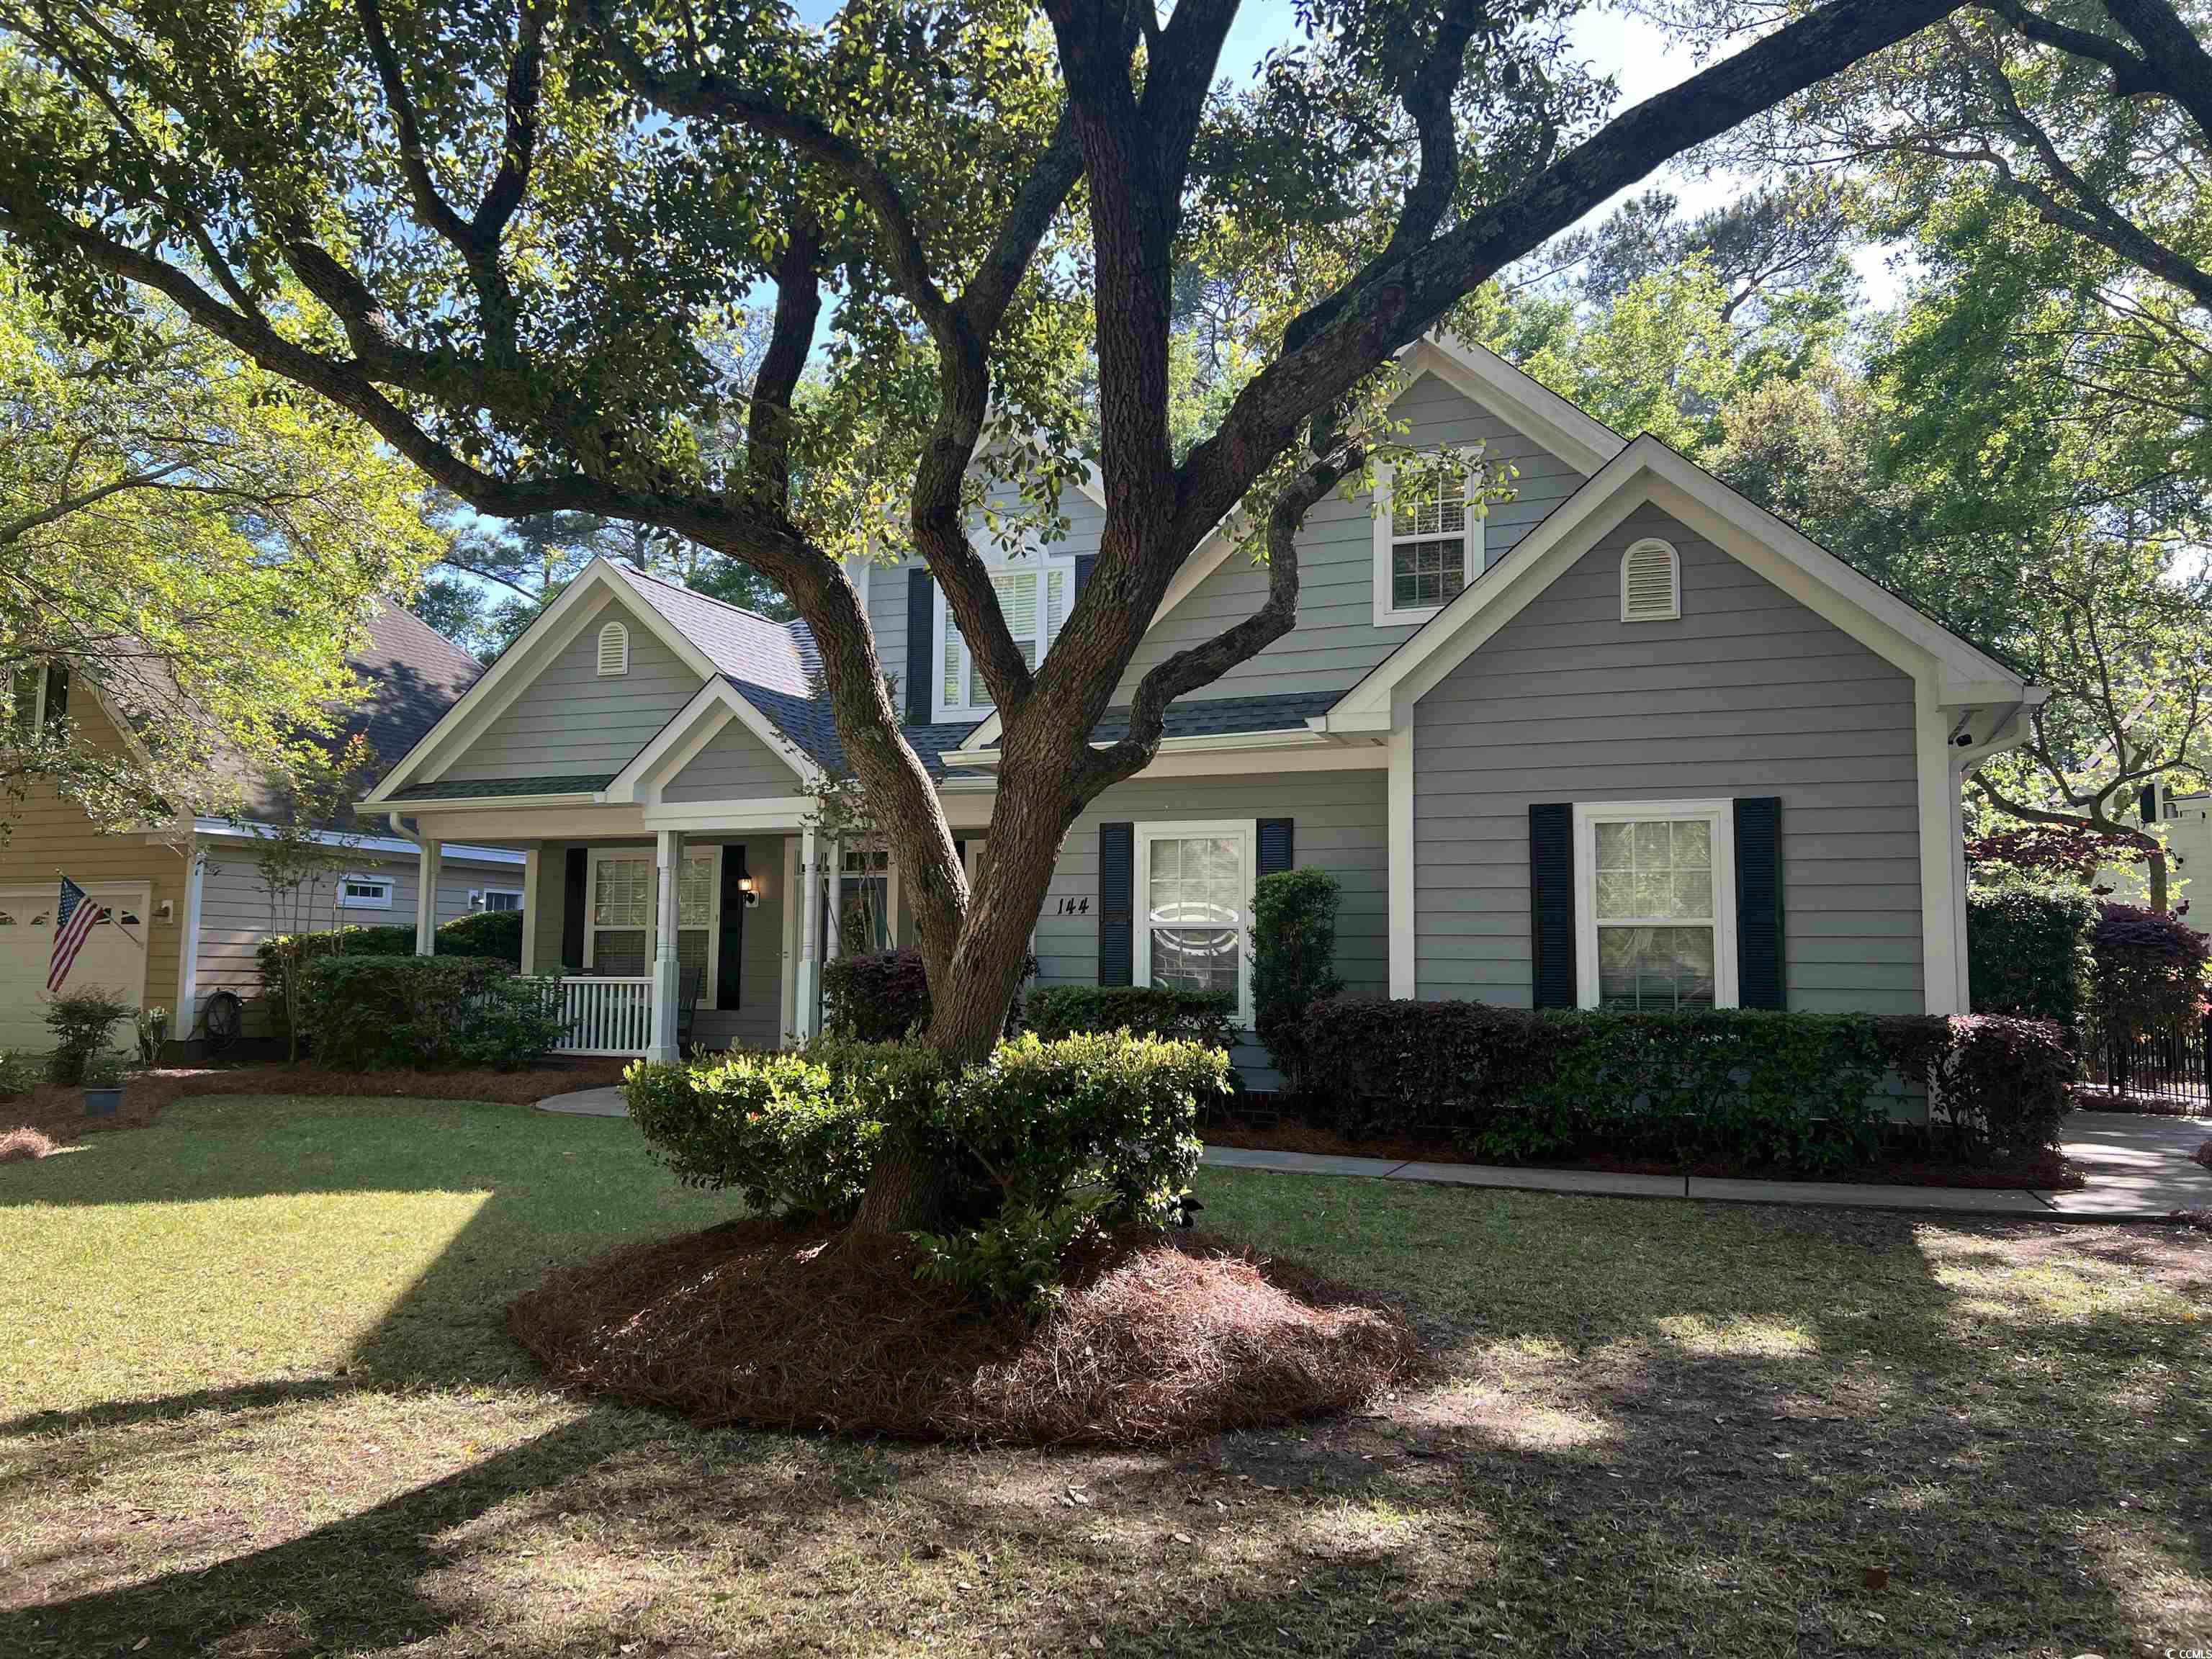 this residence, located within the gated community of pawleys plantation, has all that's needed in today's busy world.  a place to relax, a place to work and a community that offers everything for your playtime.  this includes a newly updated, jack nichlaus designed golf course. you're within minutes of the incredible shopping and restaurants of pawleys, as well as one of the most beautiful beaches around.  the home has a current design and features a huge bonus room that could be used as a fourth bedroom; if needed. for those with small children or pets, you'll enjoy the fenced back yard.  there also an irrigation system that will help maintain the well designed landscaping. the low maintenance hardie-plank siding means you'll have more time for fun. wave at the neighbors while rocking on the wide front porch. a beautiful home in a terrific community.  make plans to see 144 grey fox loop as soon as possible.